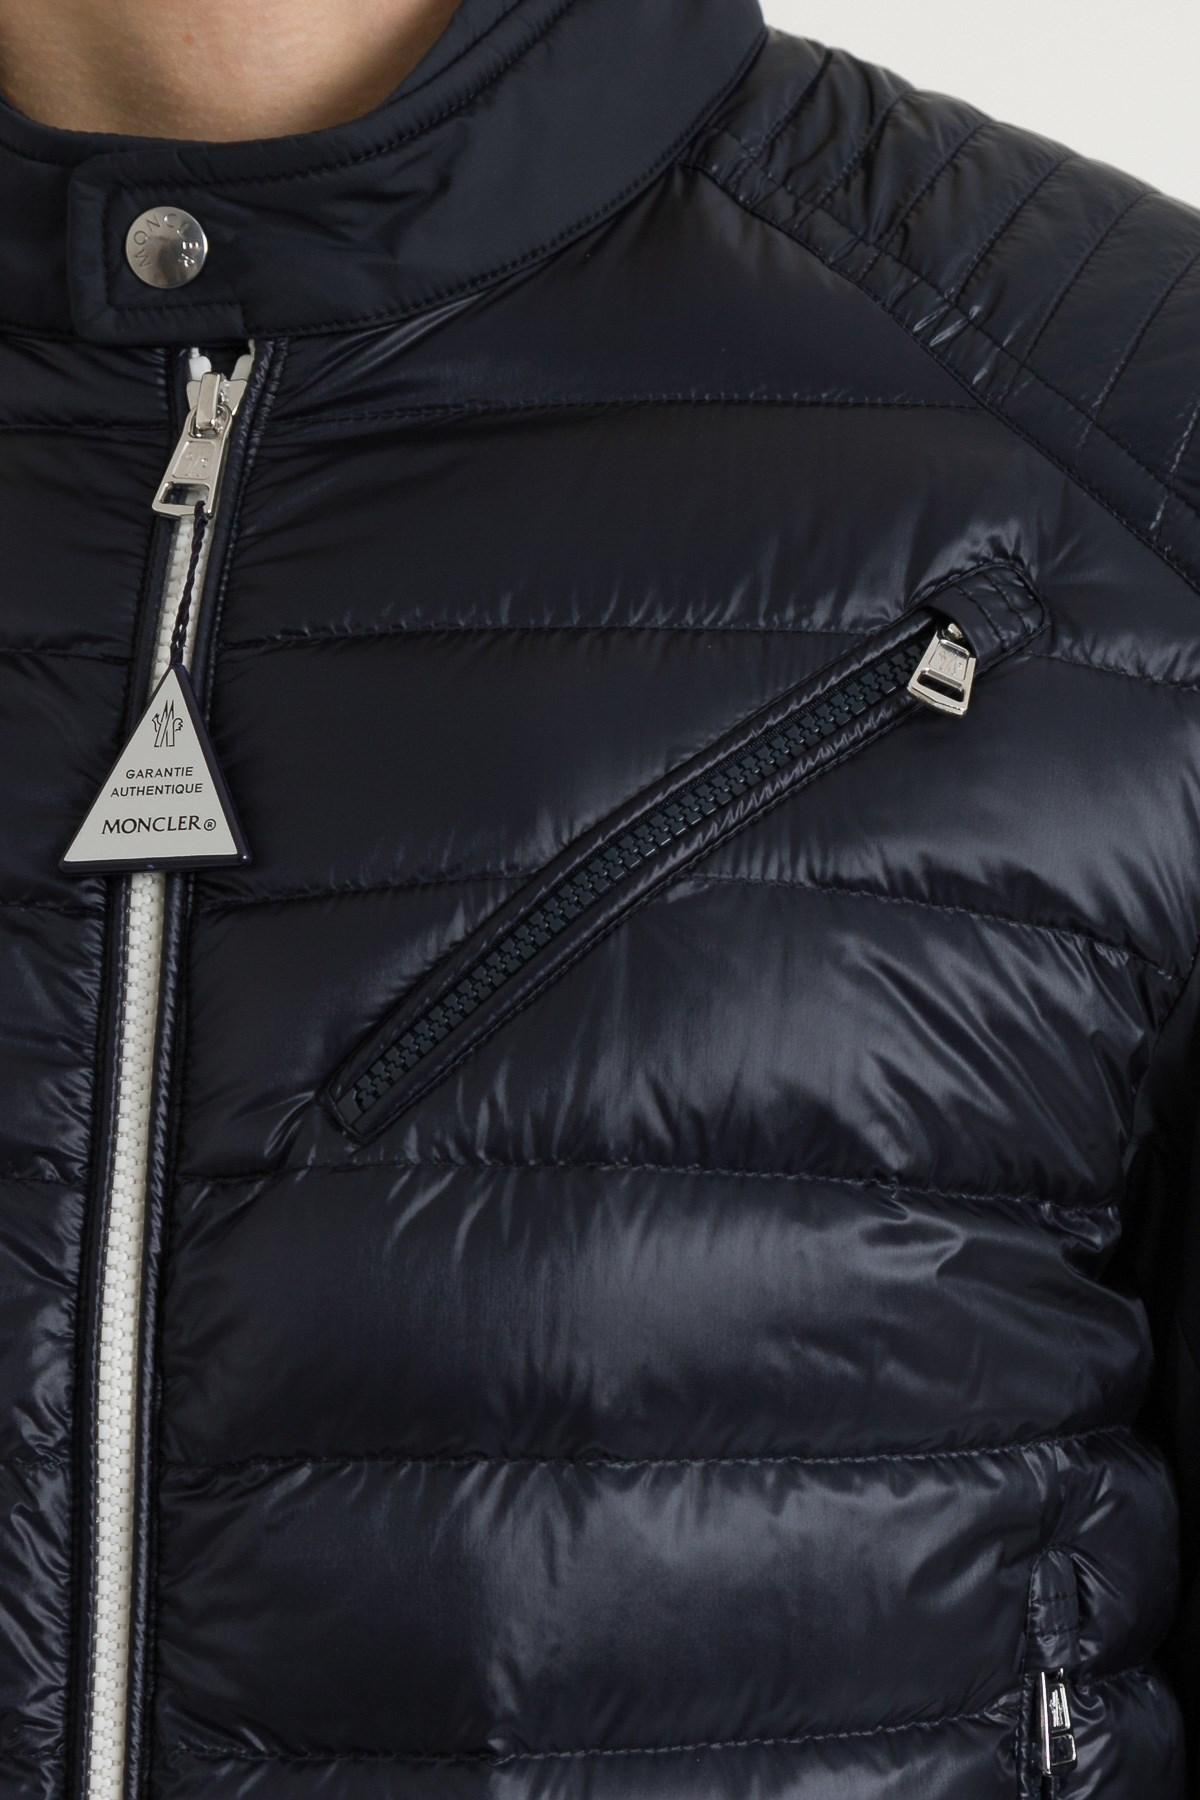 moncler andrieux jacket